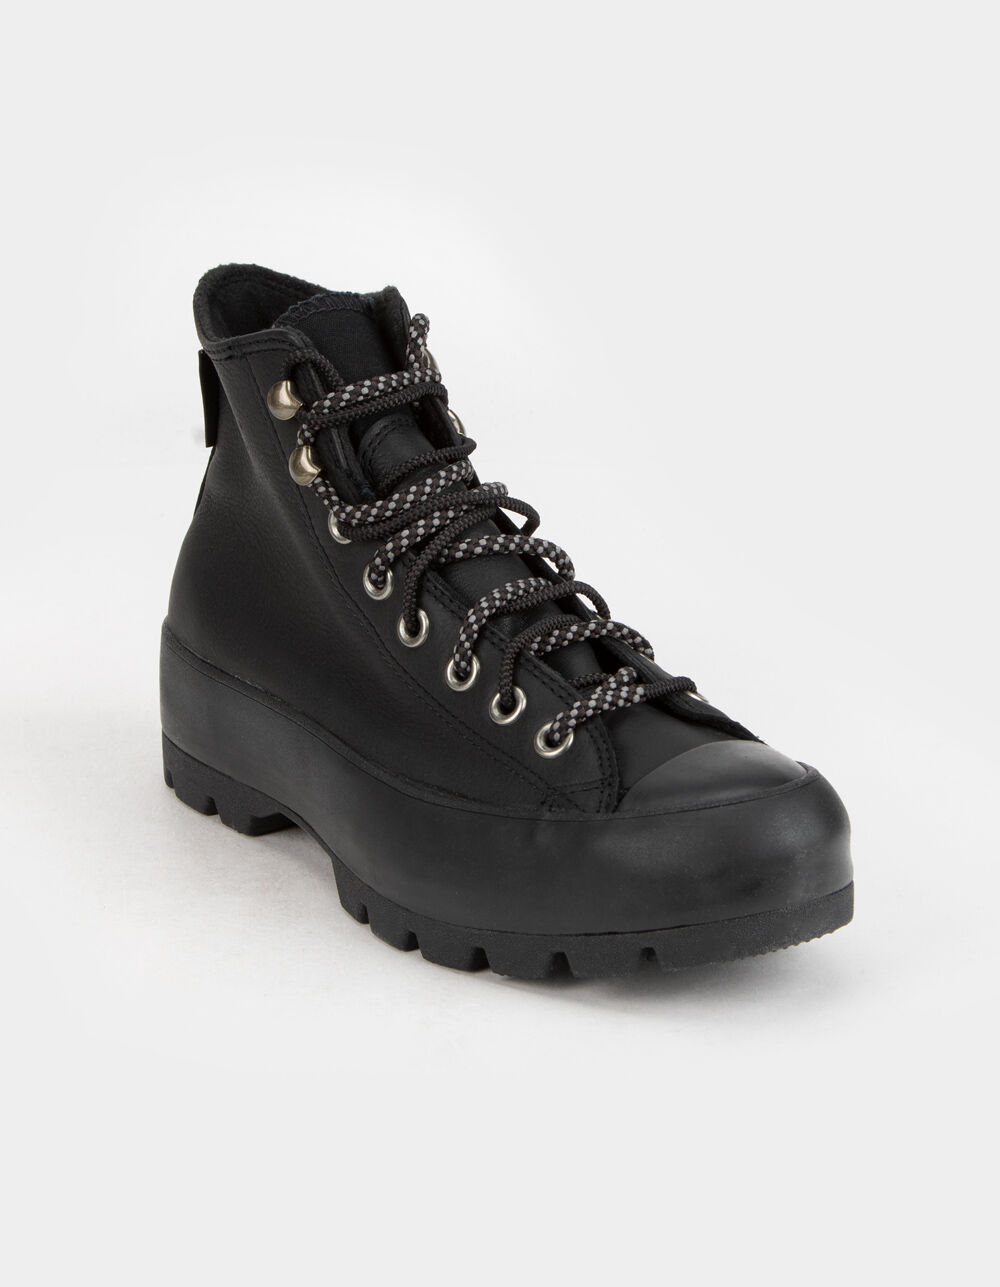 CONVERSE Winter Gore-Tex Lugged Chuck Taylor All Star Womens Boots ...